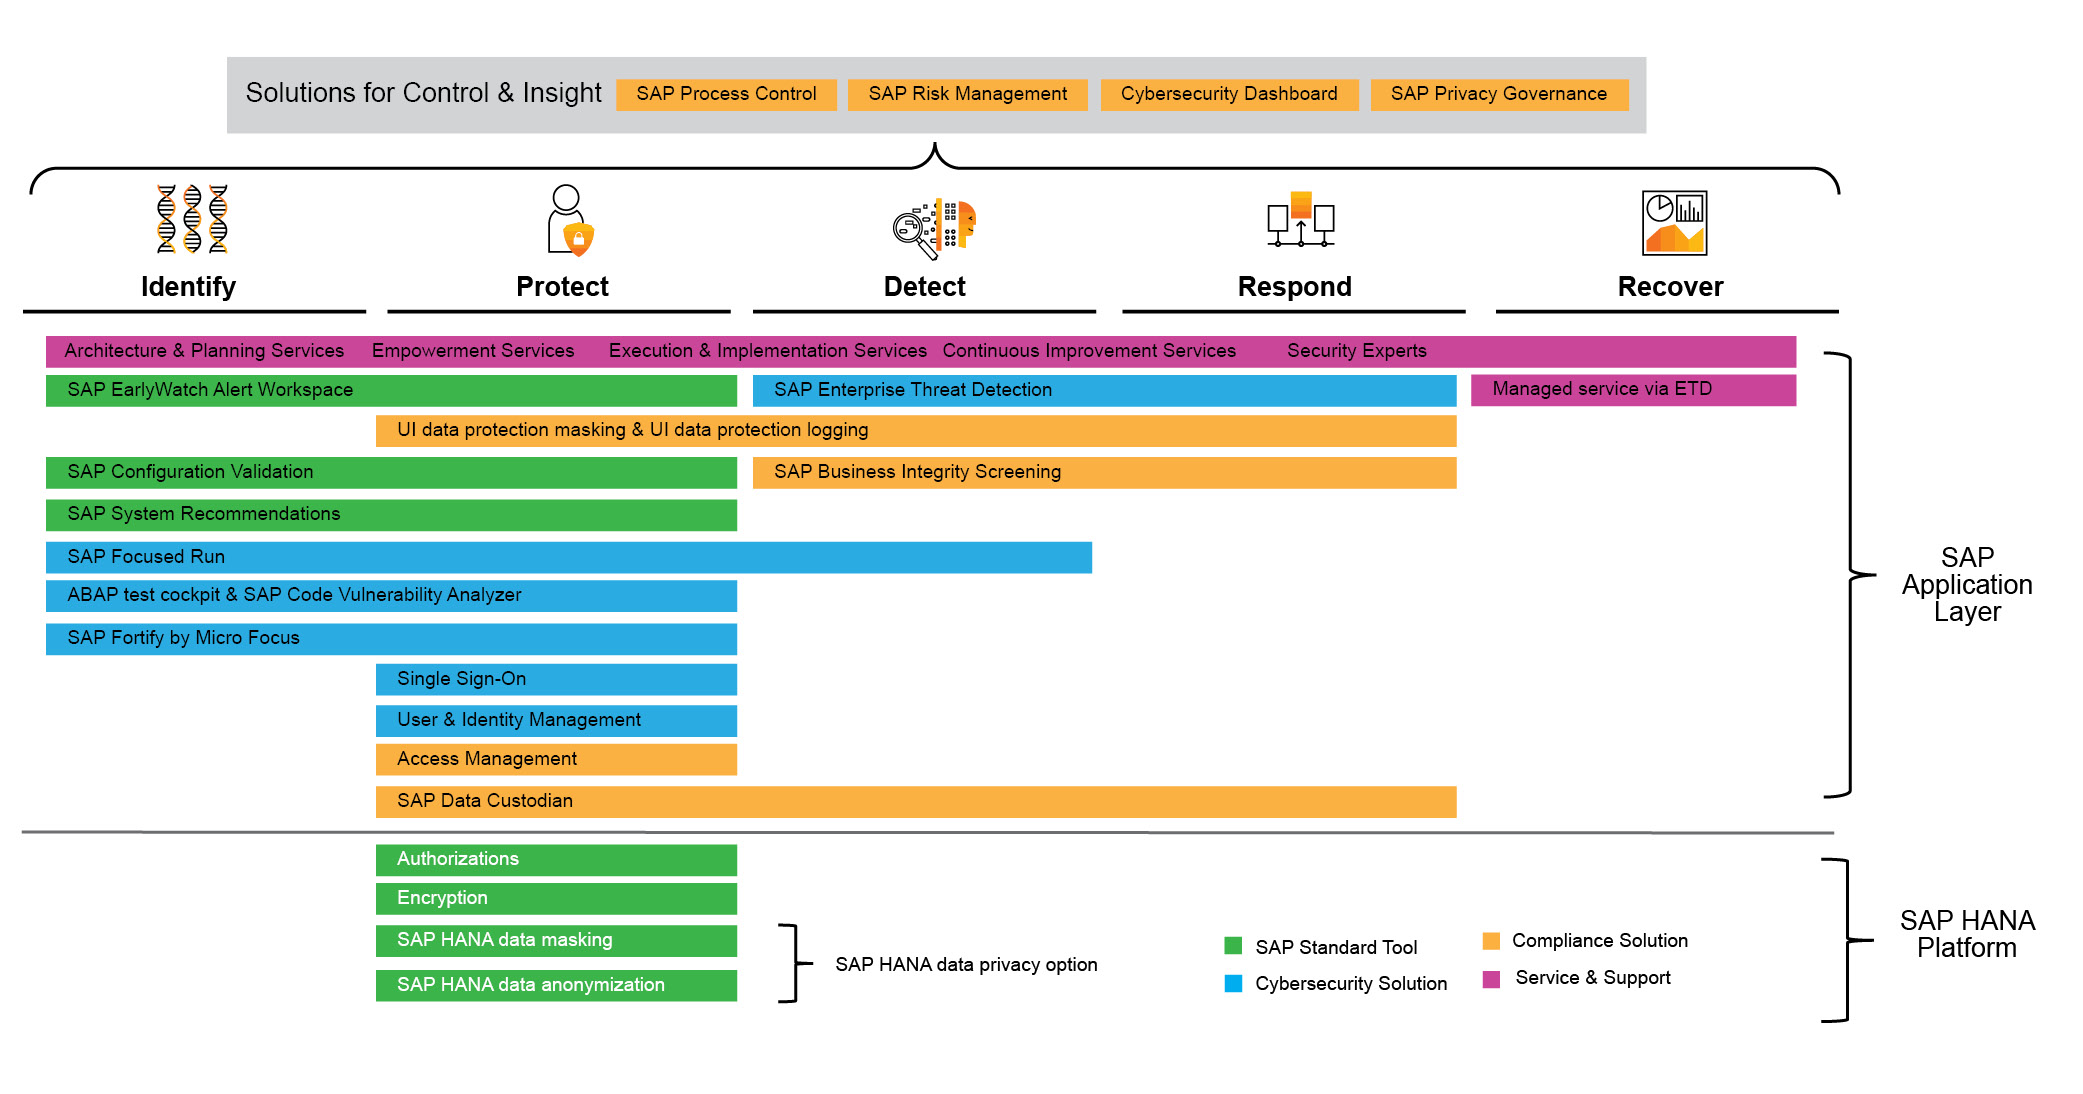 Figure 3 — An overview of SAP’s security and compliance solutions based on the NIST Cybersecurity Framework